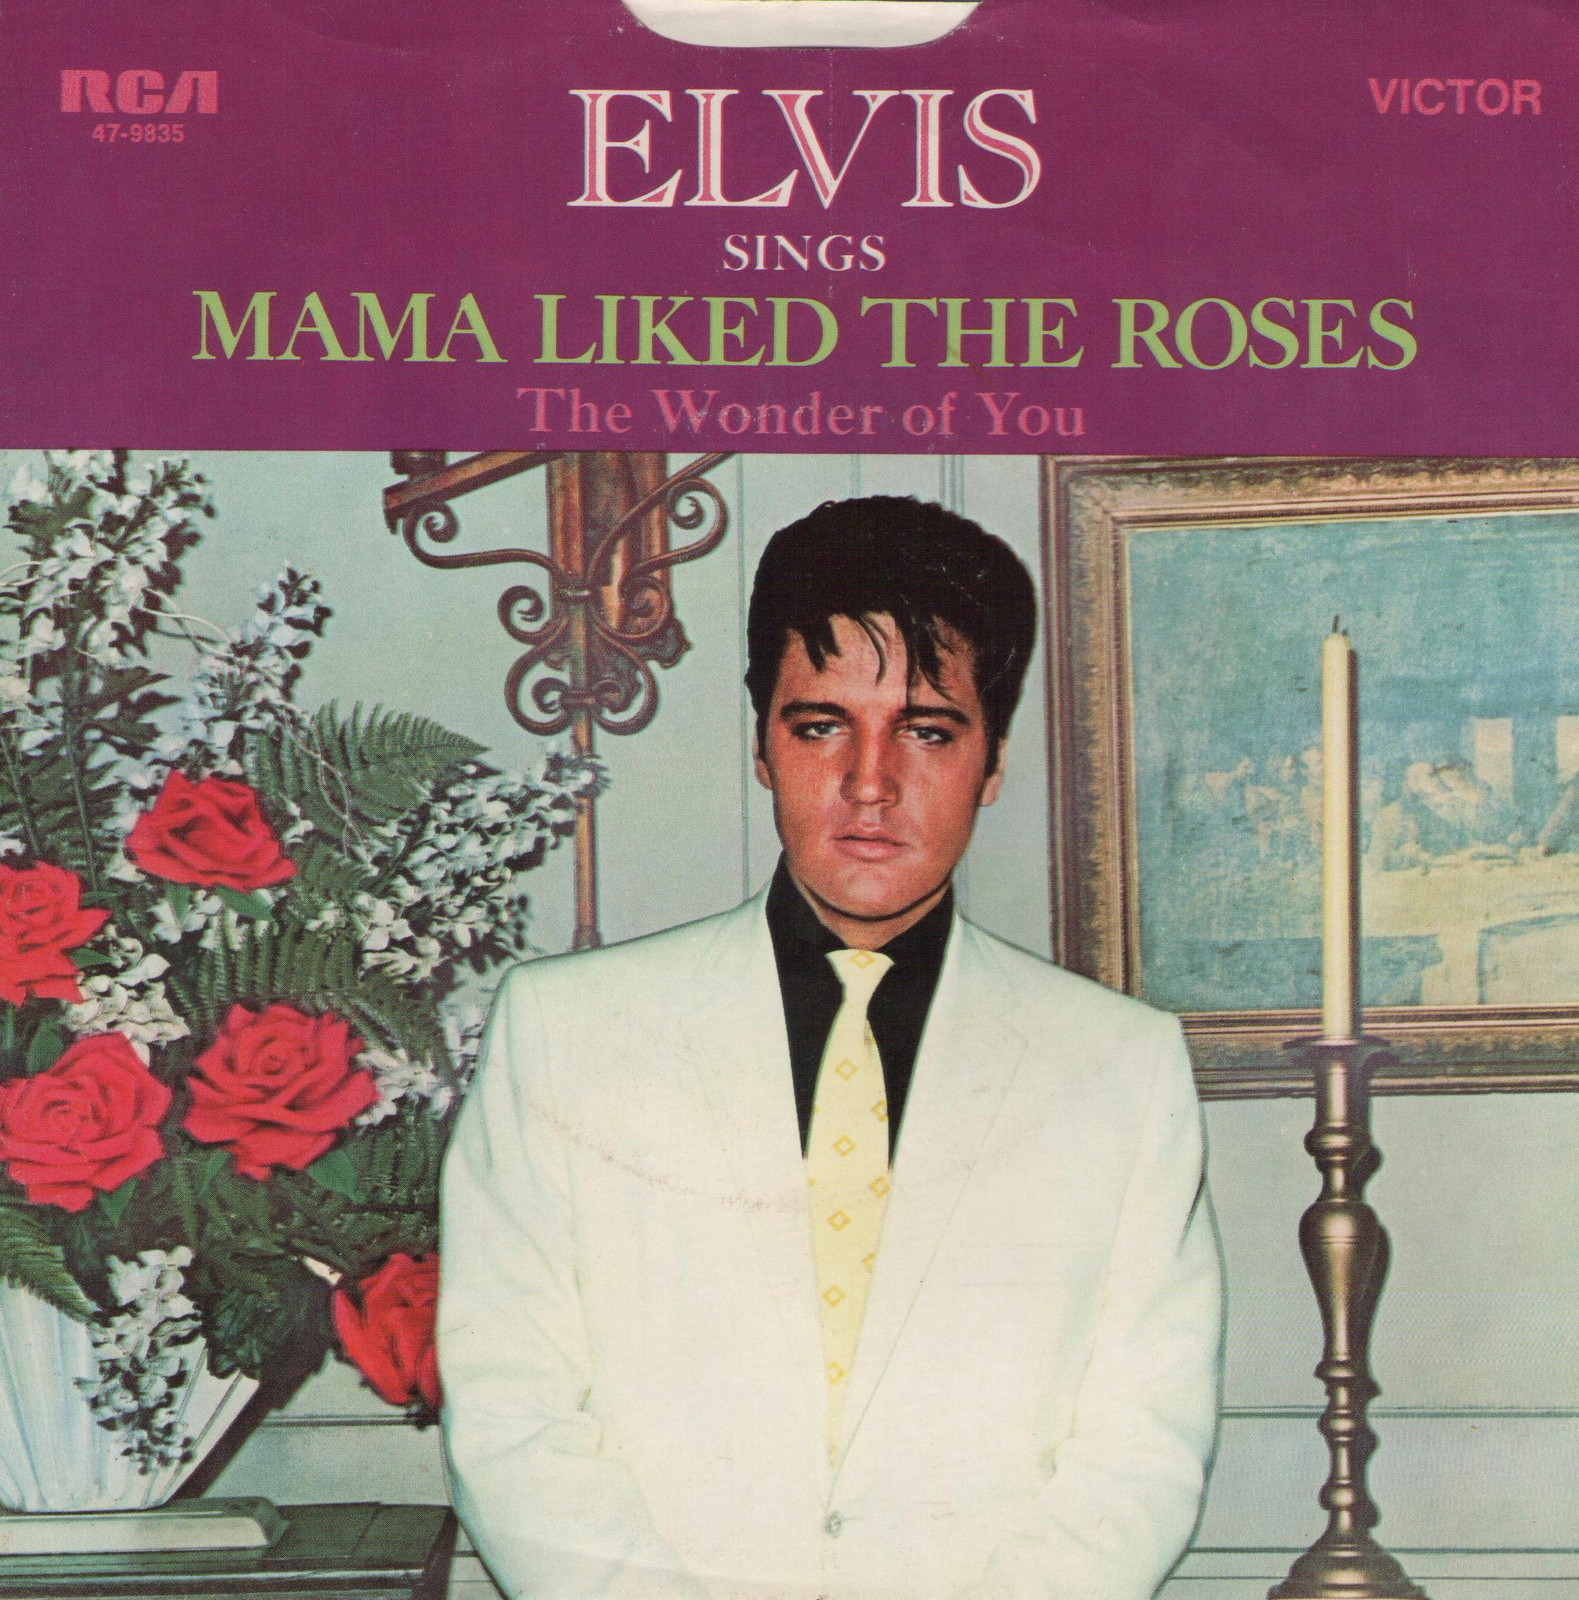 The Wonder Of You / Mama Liked The Roses 47-9835bwrp5o